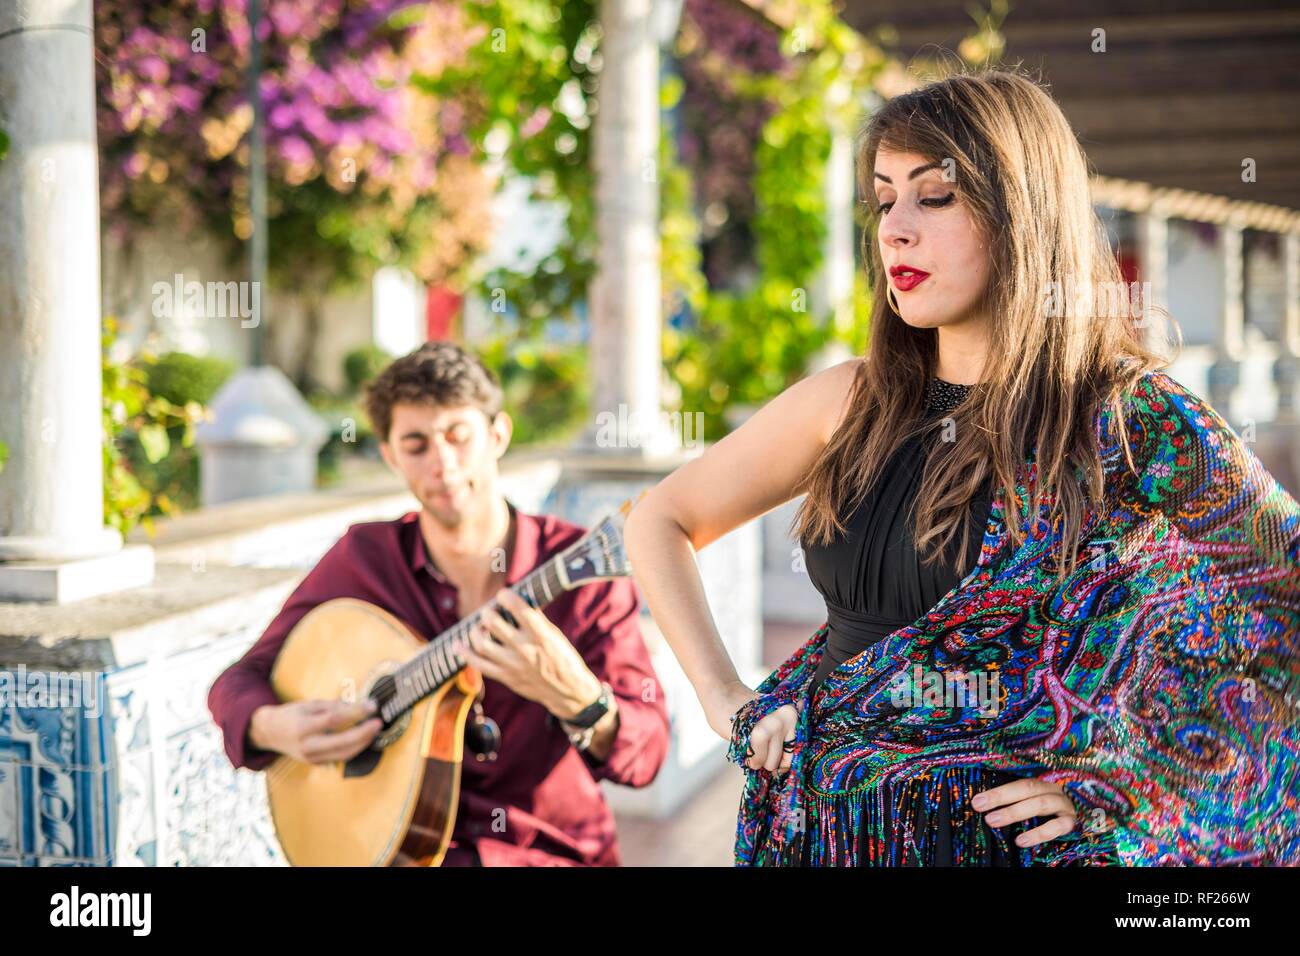 Band performing traditional music fado under pergola with portuguese tiles called azulejos in Lisbon, Portugal Stock Photo